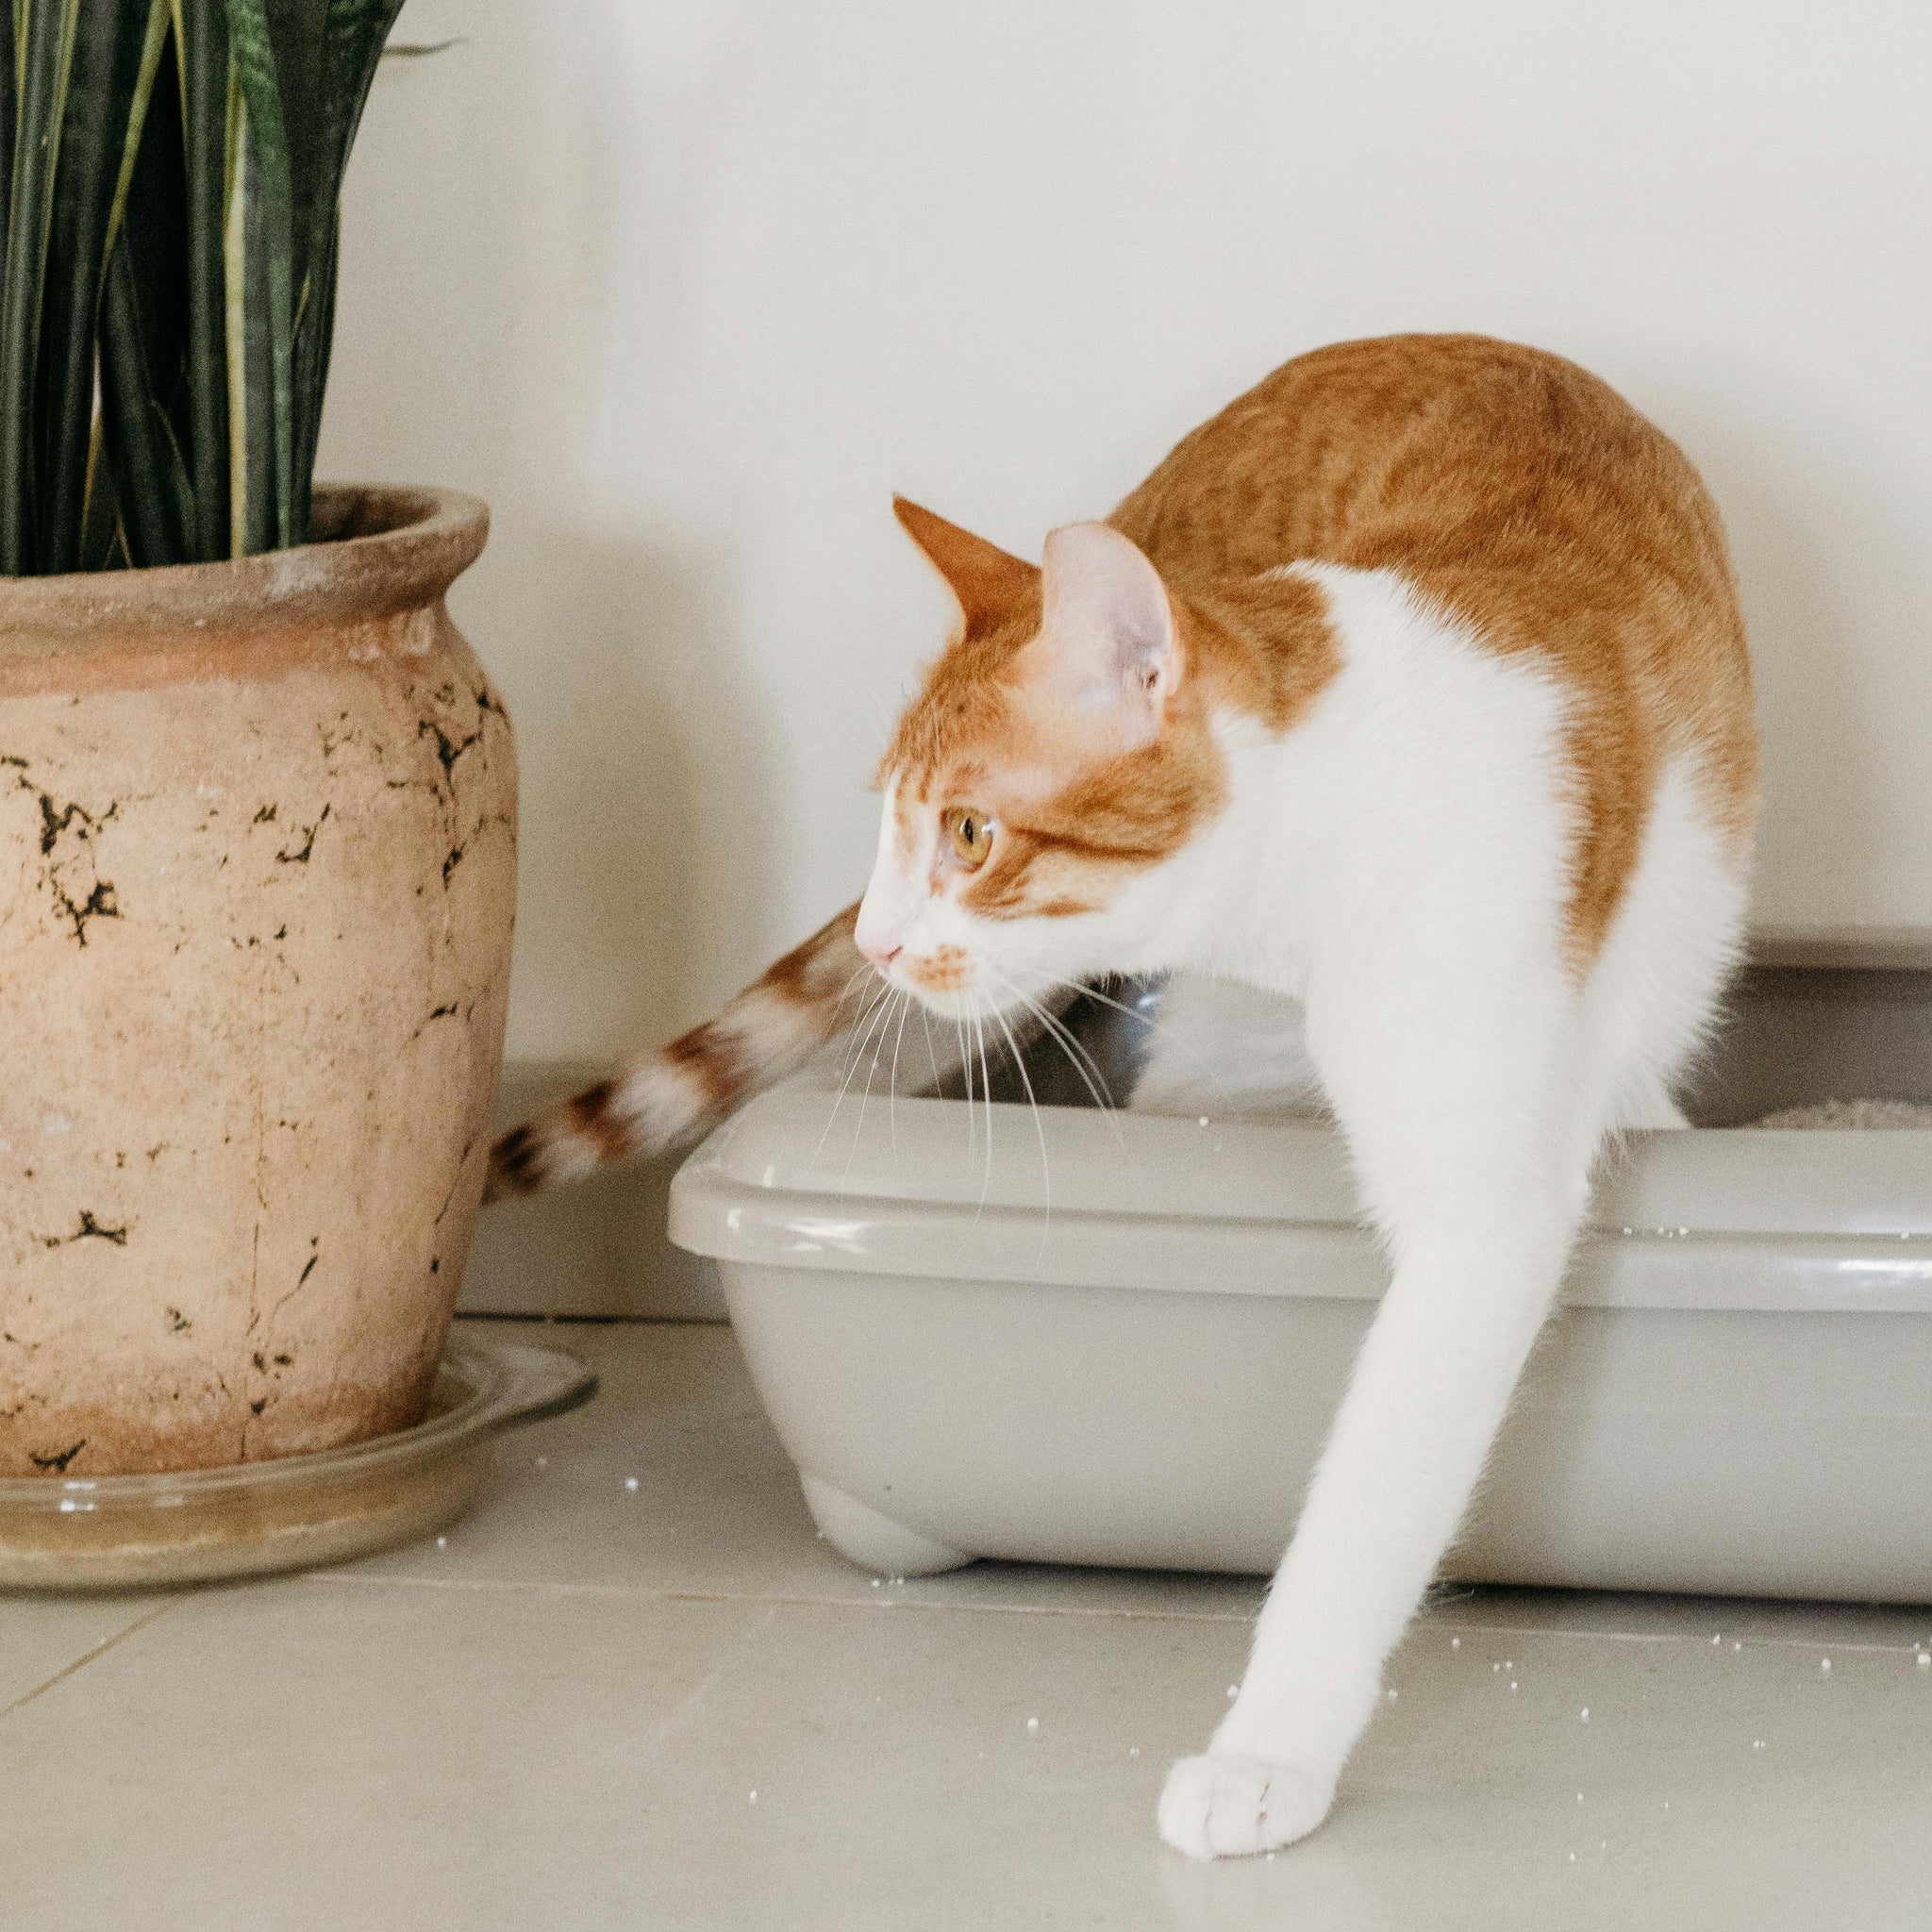 Ammonia Exposure from Cat Urine: Risks & Solutions with VistaLoo's Natural Air Filtration